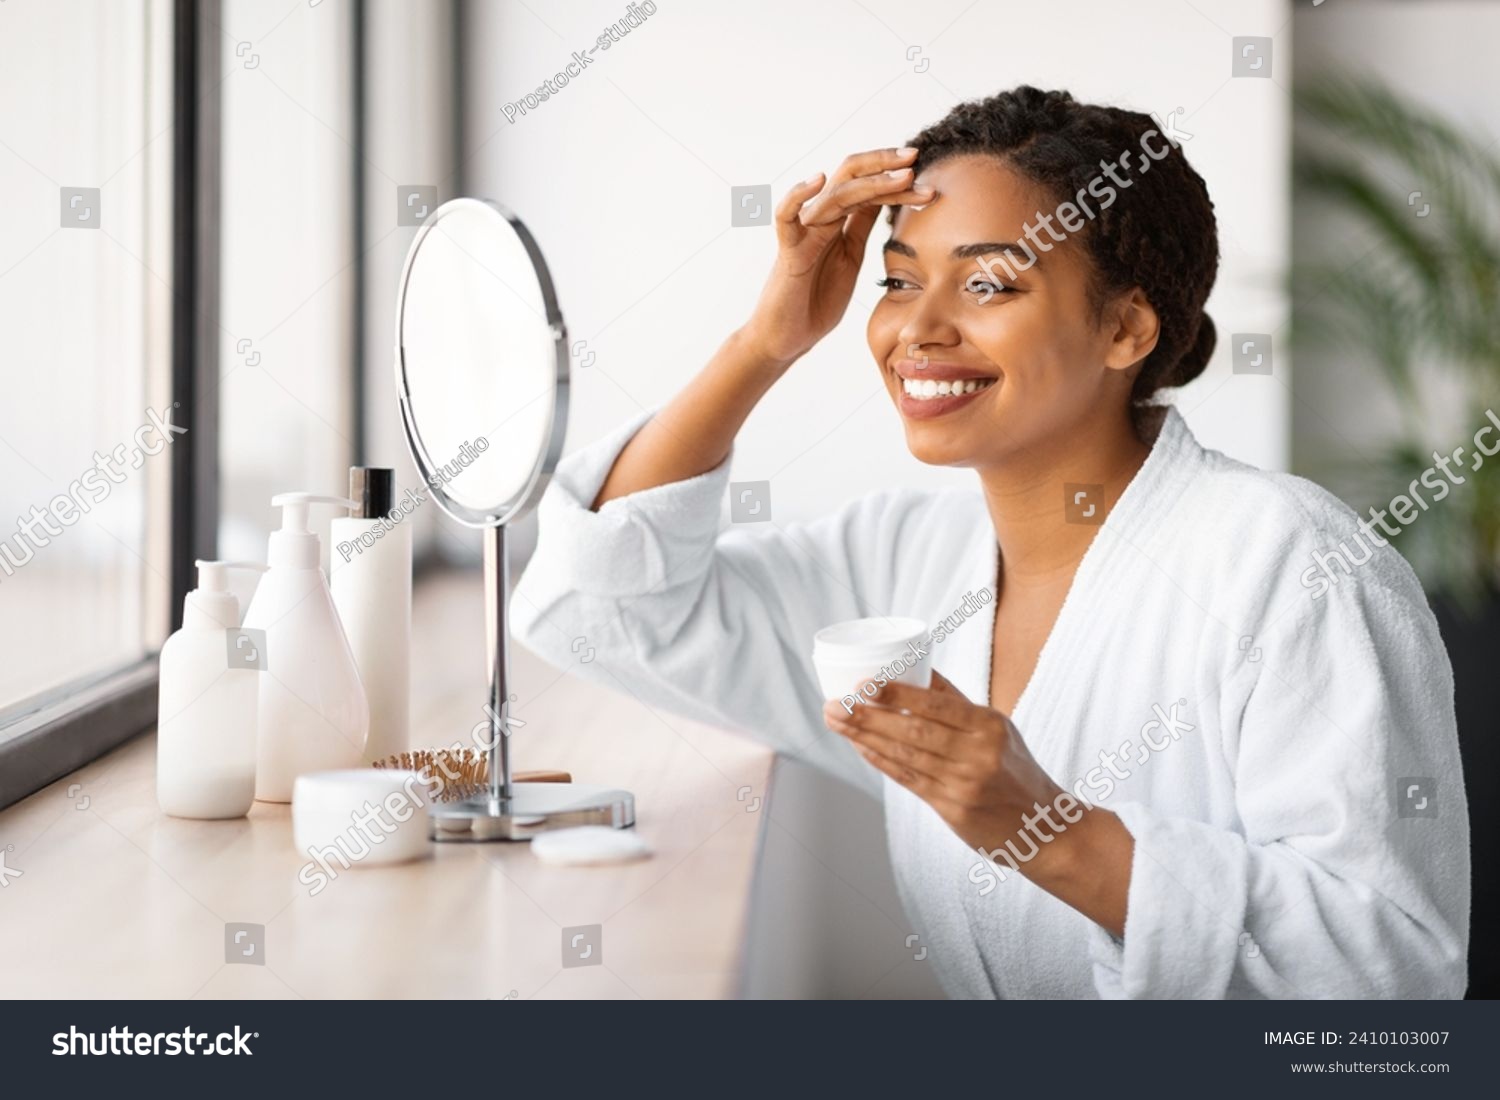 Beautiful Black Woman Sitting Near Mirror And Applying Moisturising Cream On Face, Attractive African American Lady Wearing Bathrobe Nourishing Skin After Bath, Making Beauty Routine At Home #2410103007